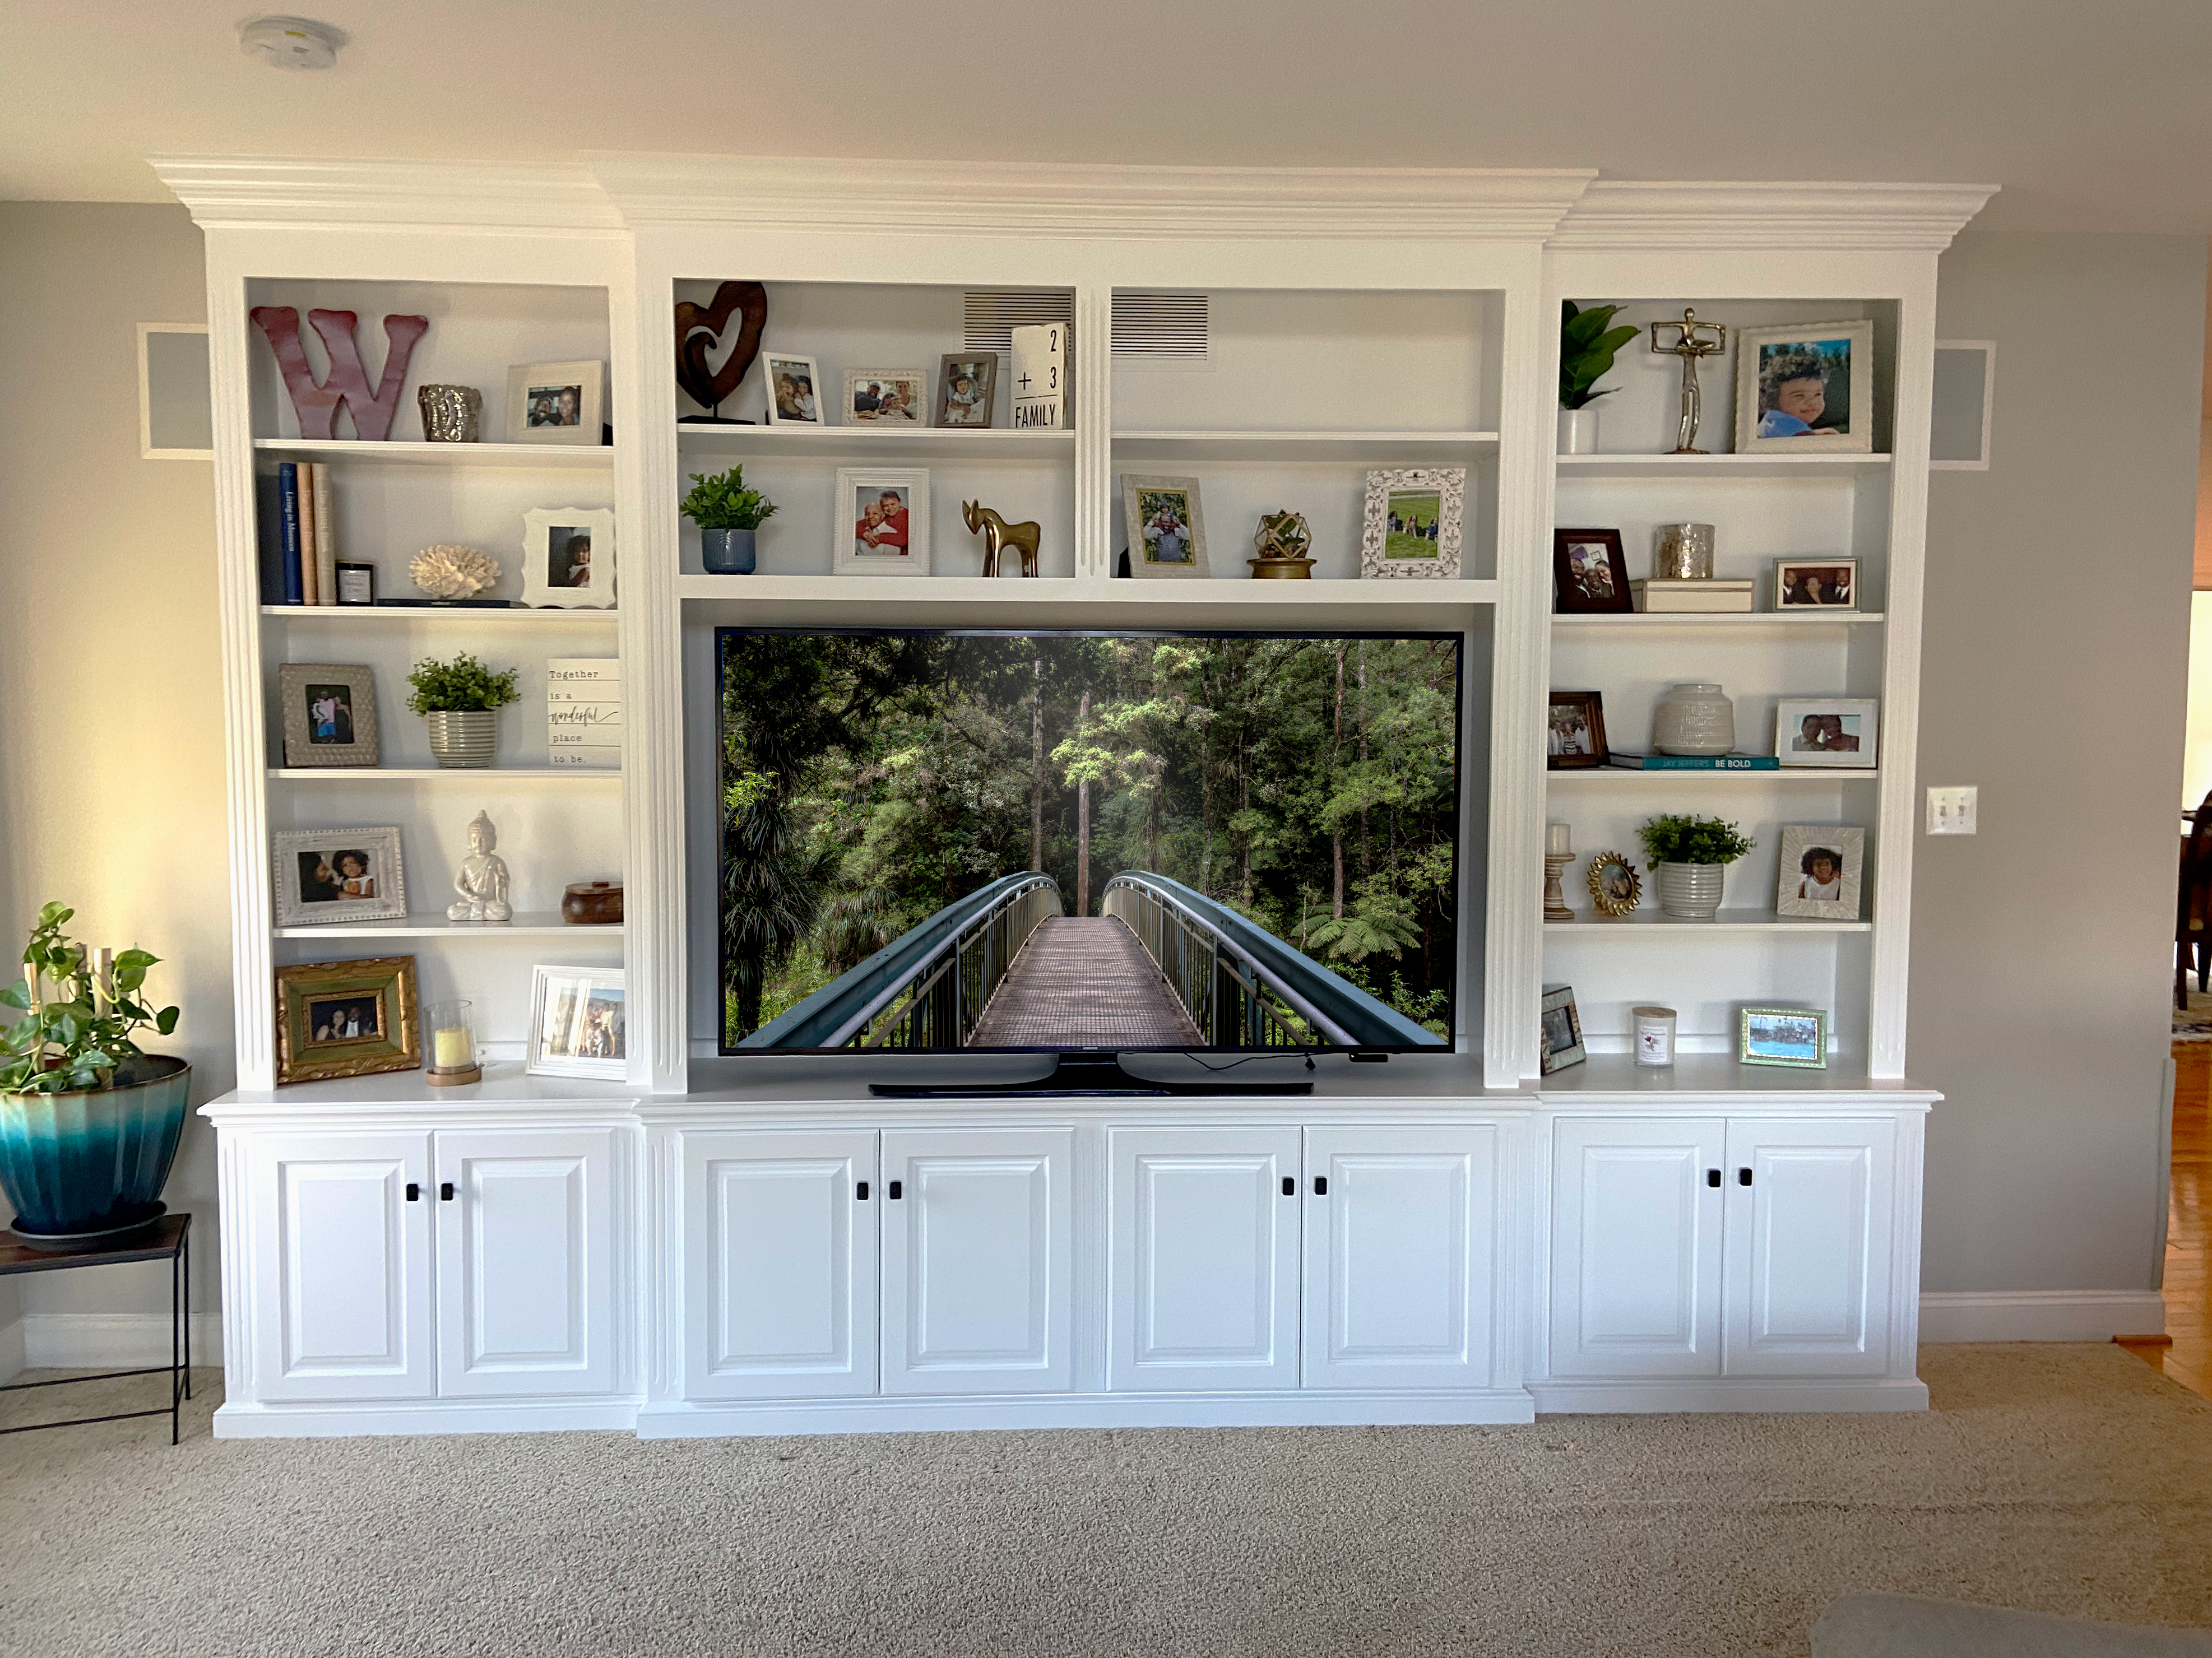 wall tv stands for flat screen tvs